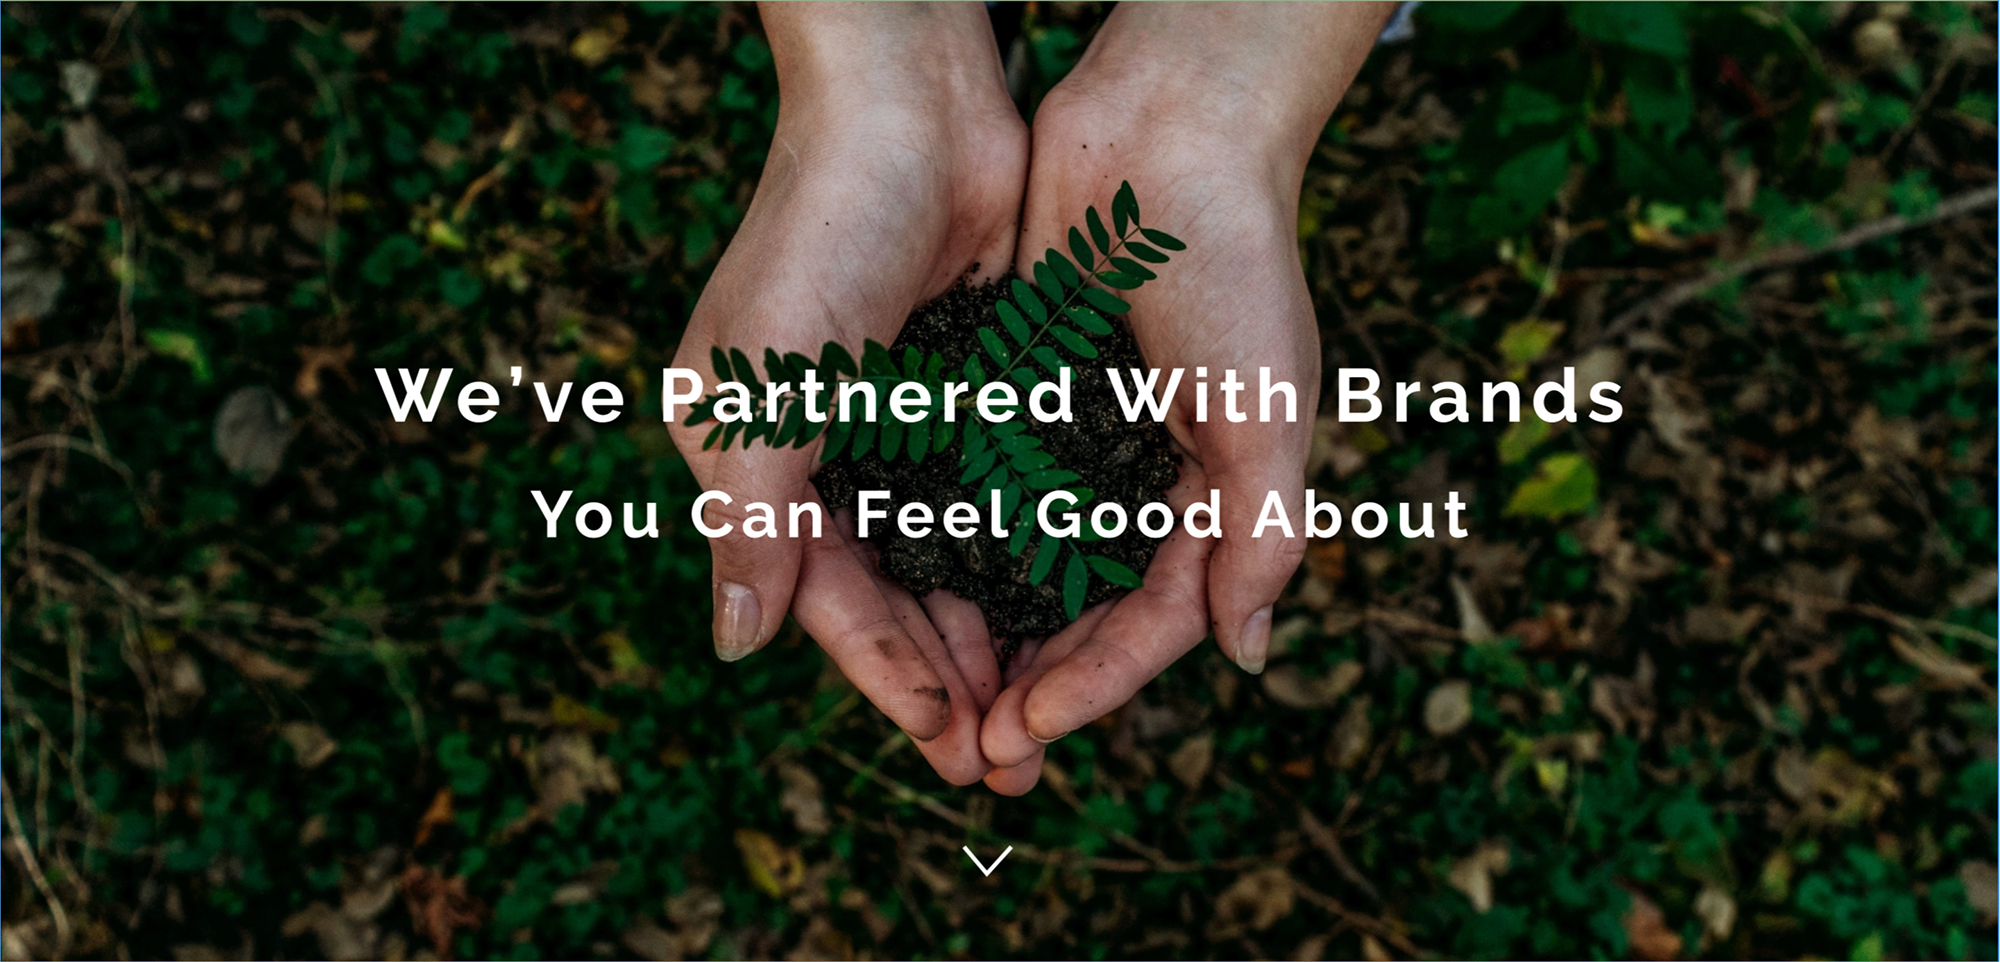 We've partnered with brands you can feel good about